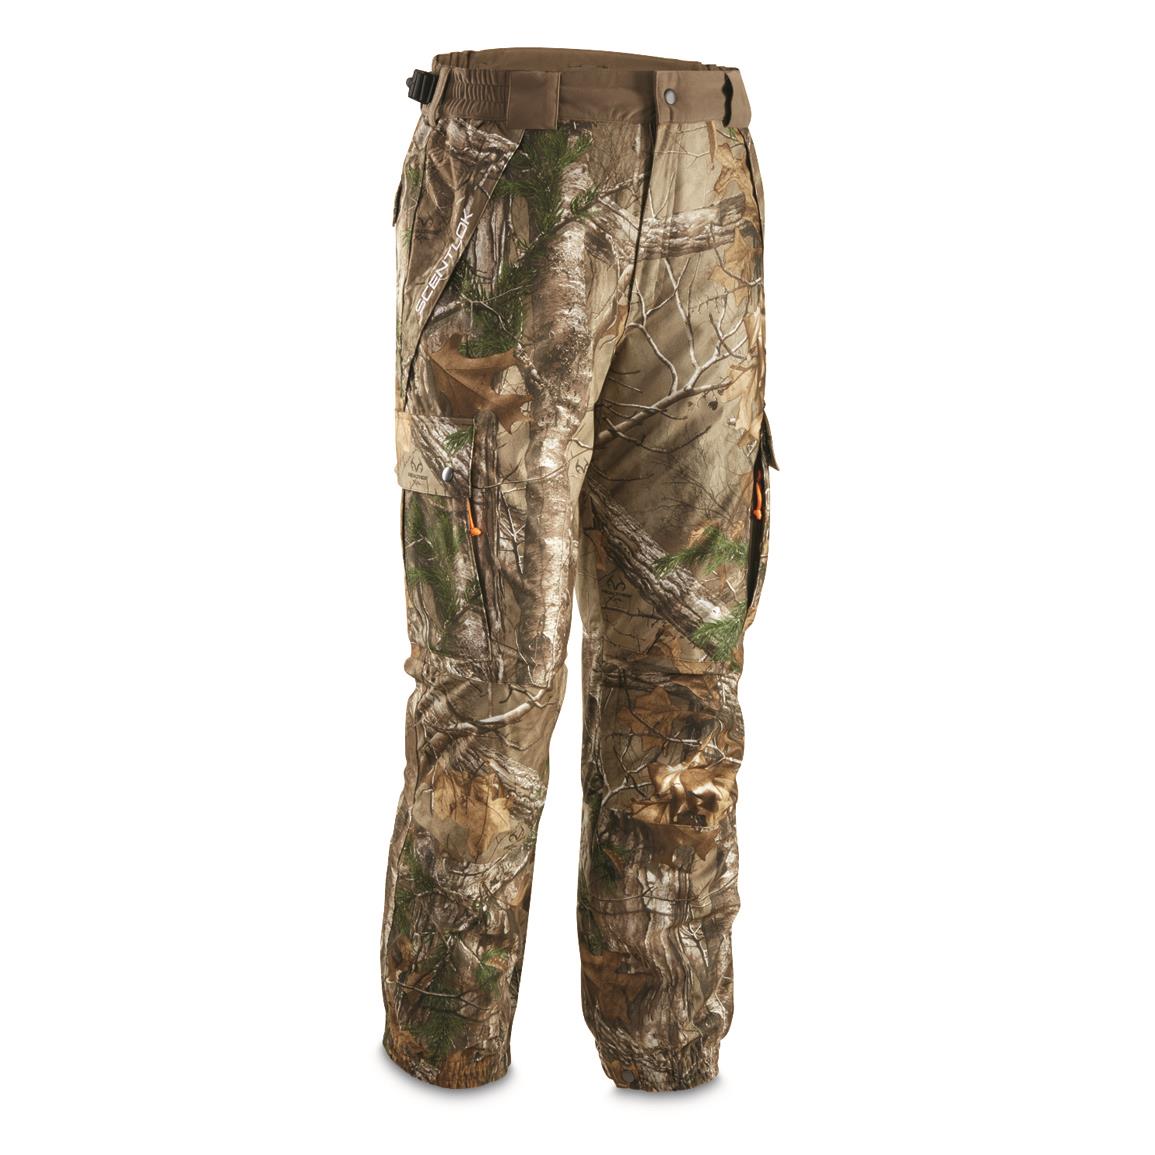 ScentLok Cold Blooded Waterproof Hunting Pants - 675944, Camo Pants at ...